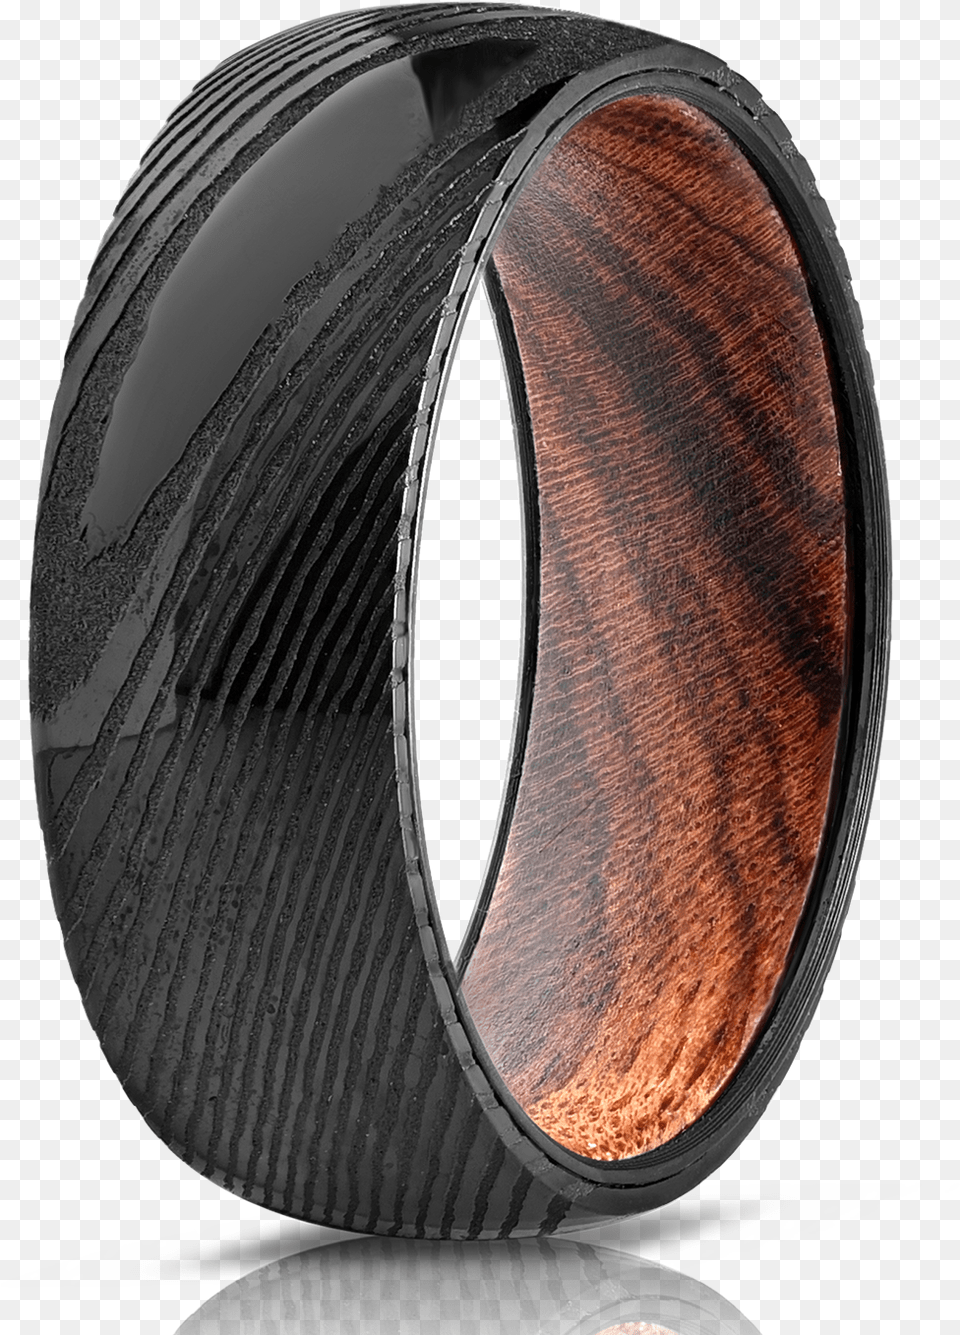 Wood Inlay Damascus Steel Mens Wedding Bands, Accessories, Jewelry, Ring, Bracelet Free Transparent Png